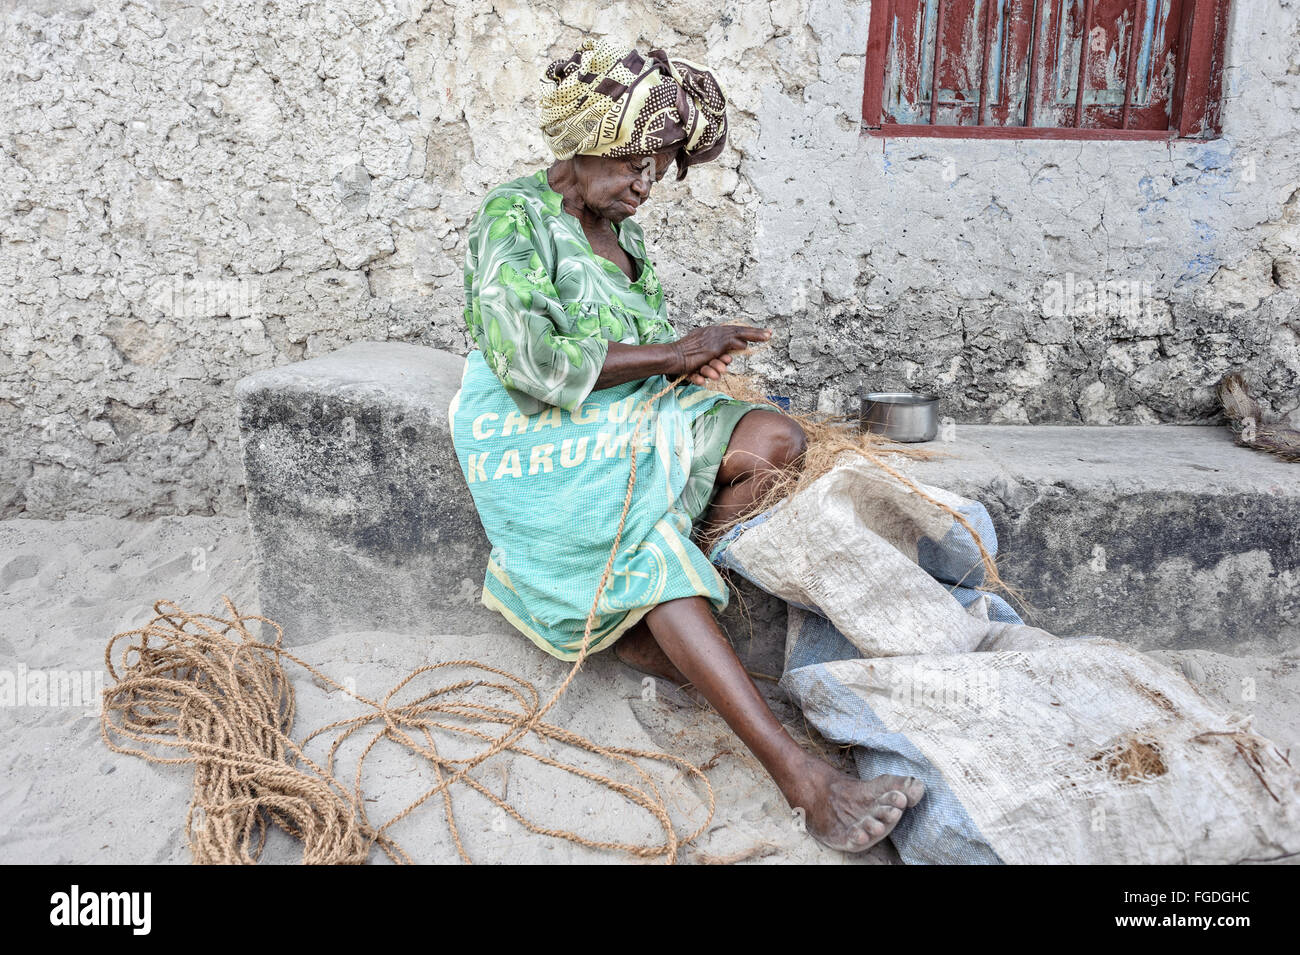 Zanzibari old woman with colourful attire making a rope with coconut fibers outside her home. Stock Photo